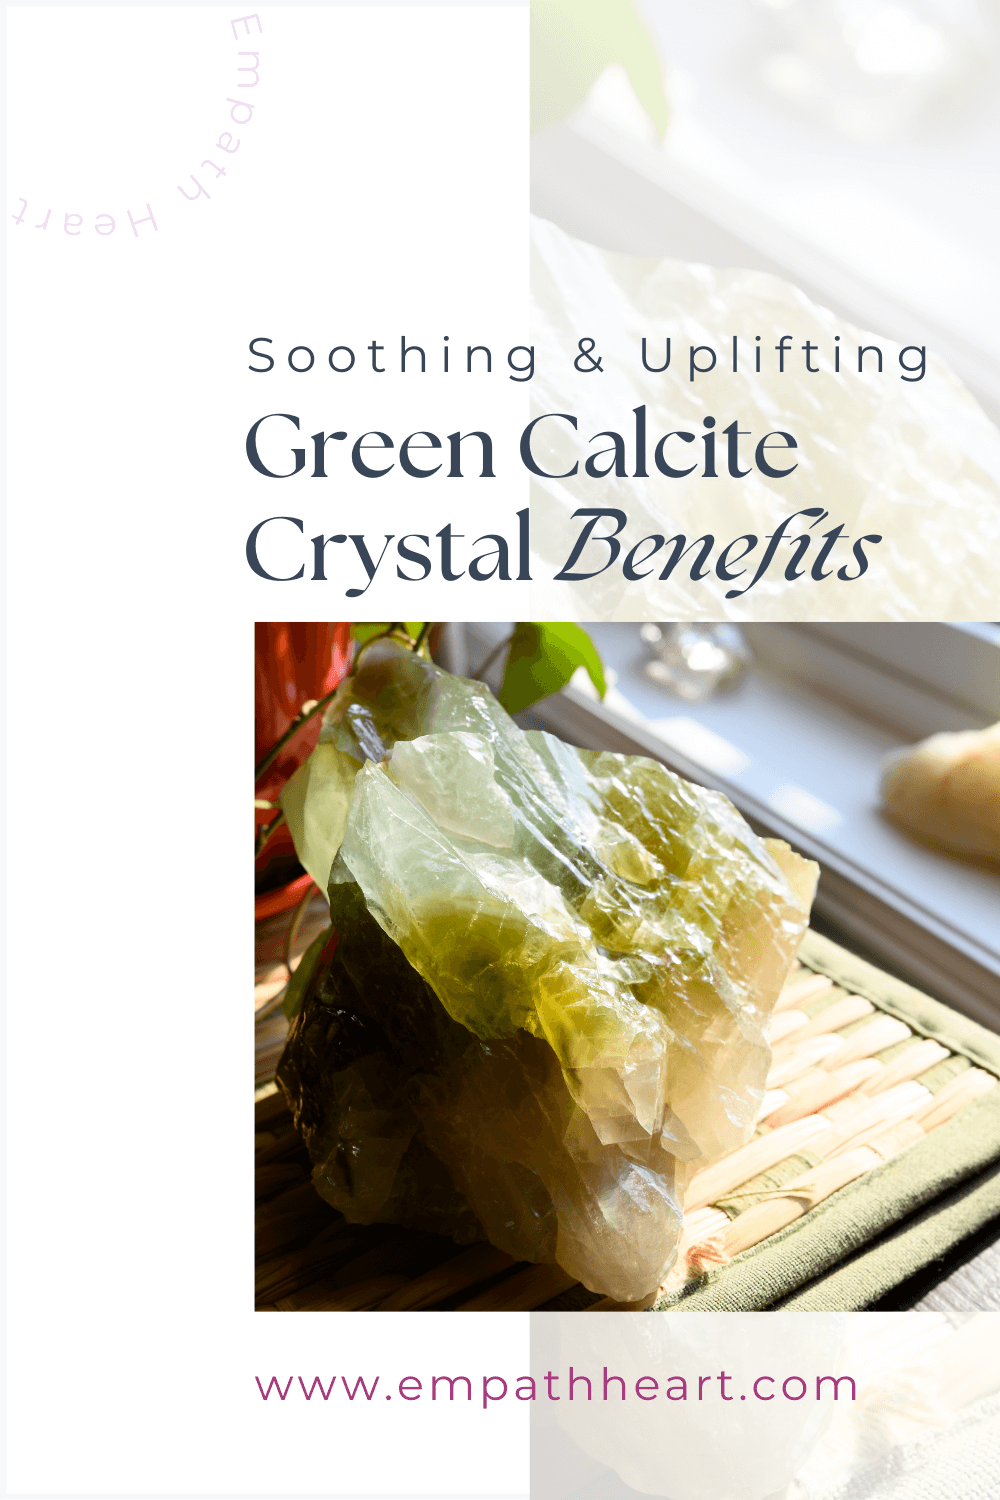 Green Calcite Crystal Benefits